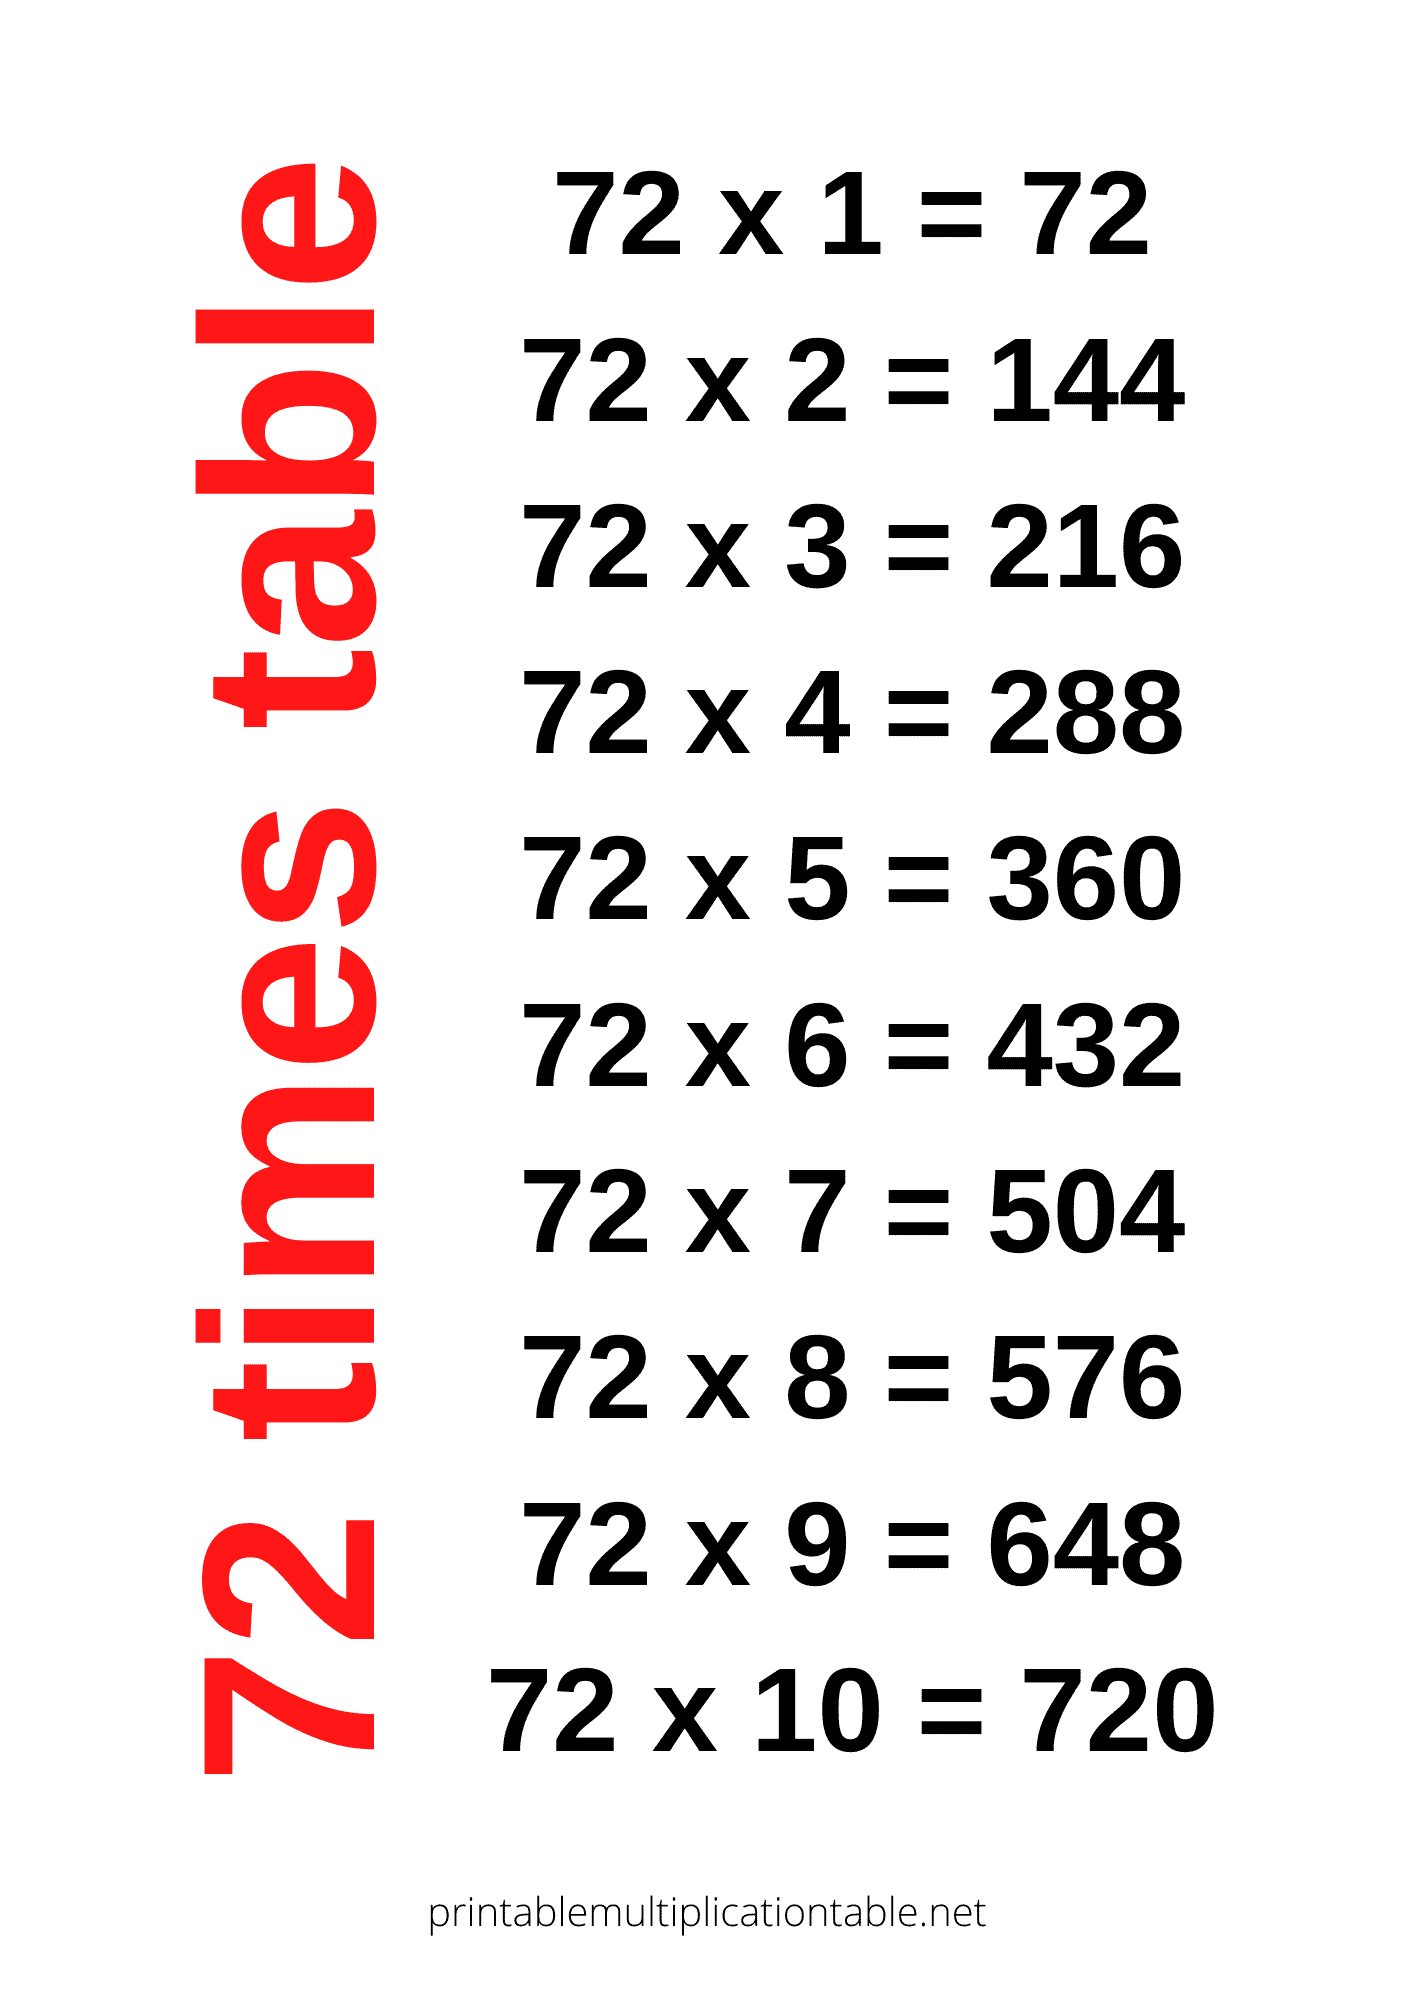 72 times table chart